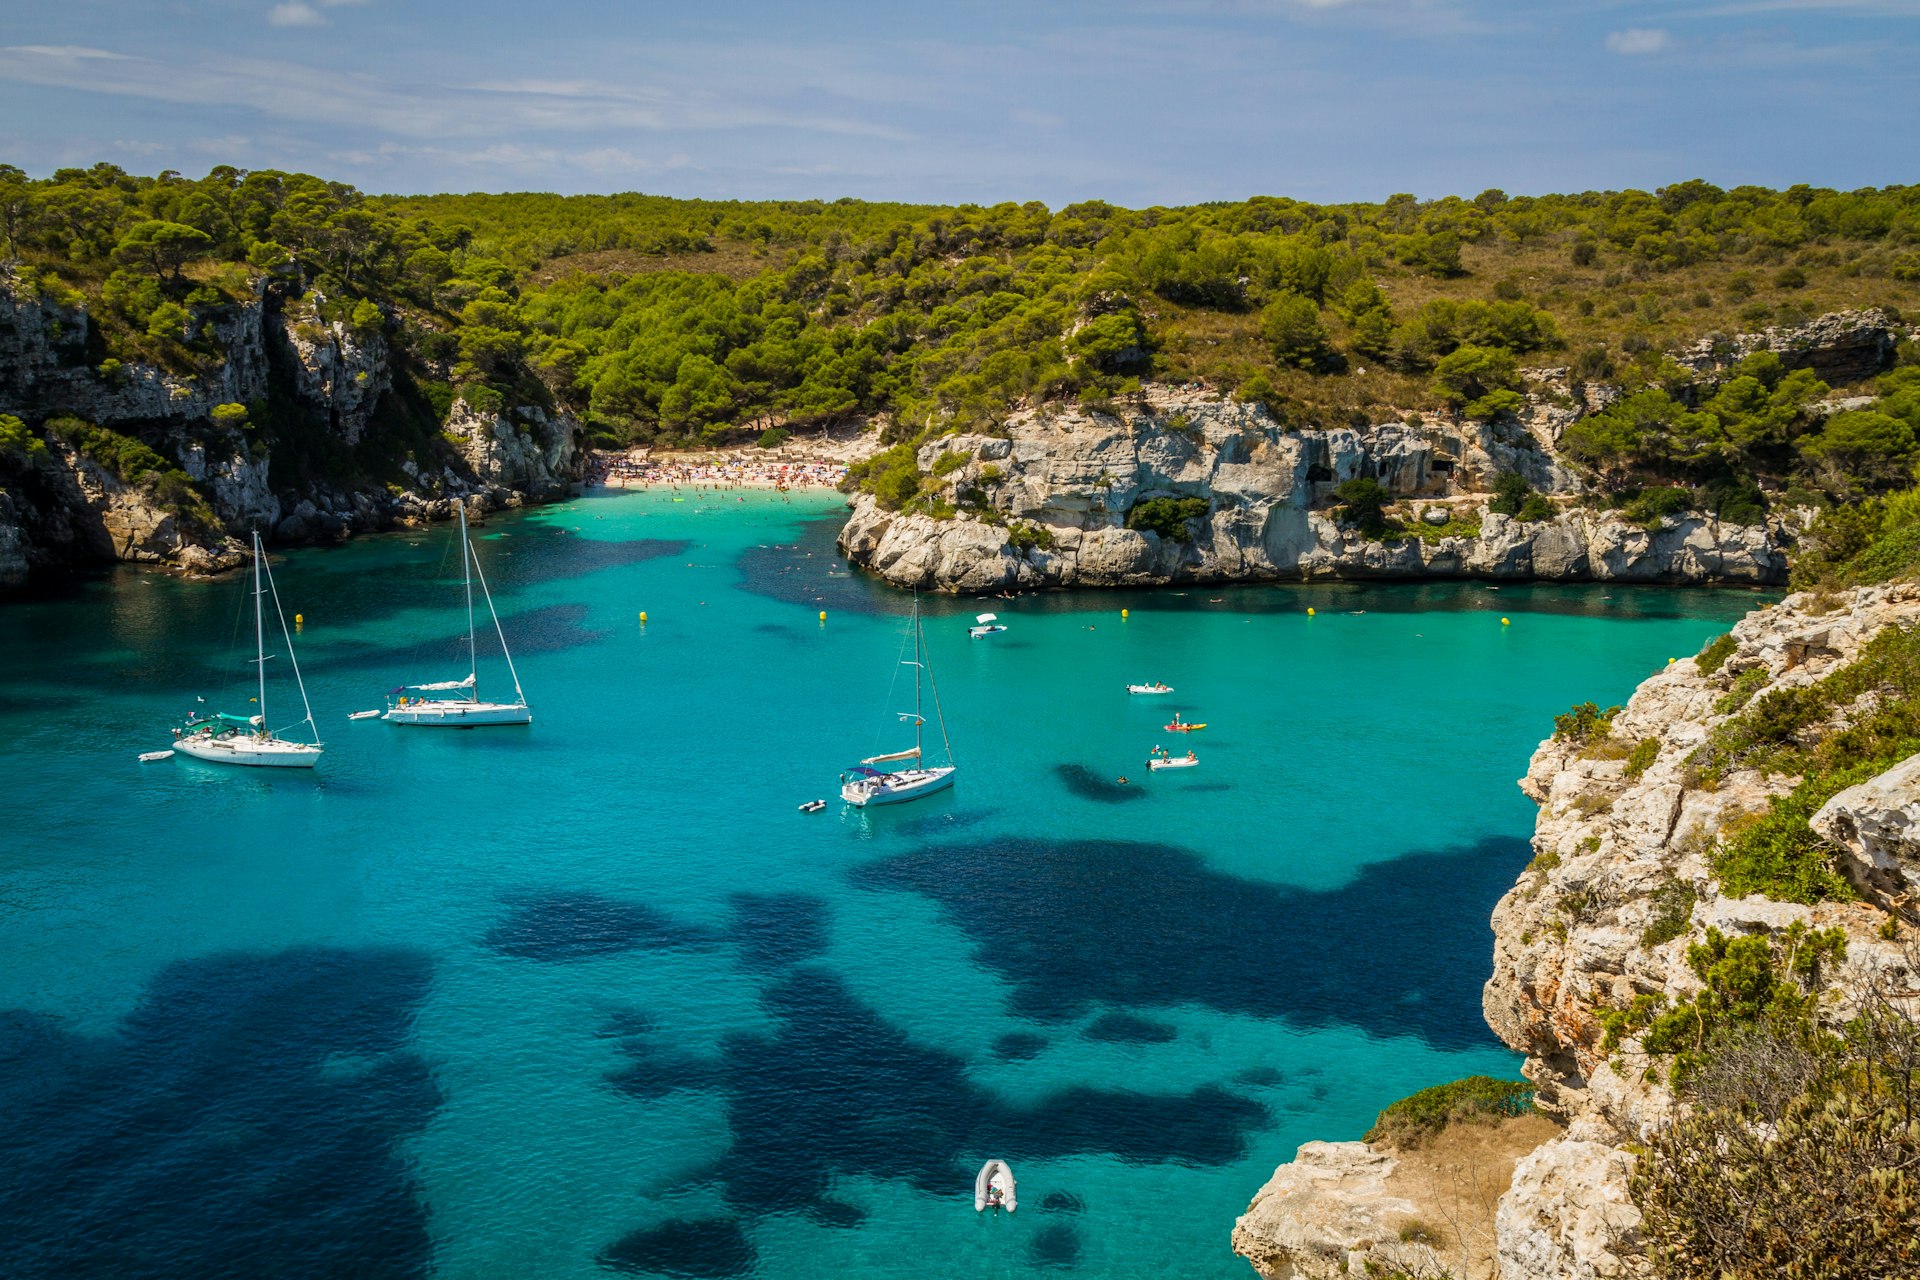 A turquoise bay of water meets a rocky coast. Several small white boats are moored there